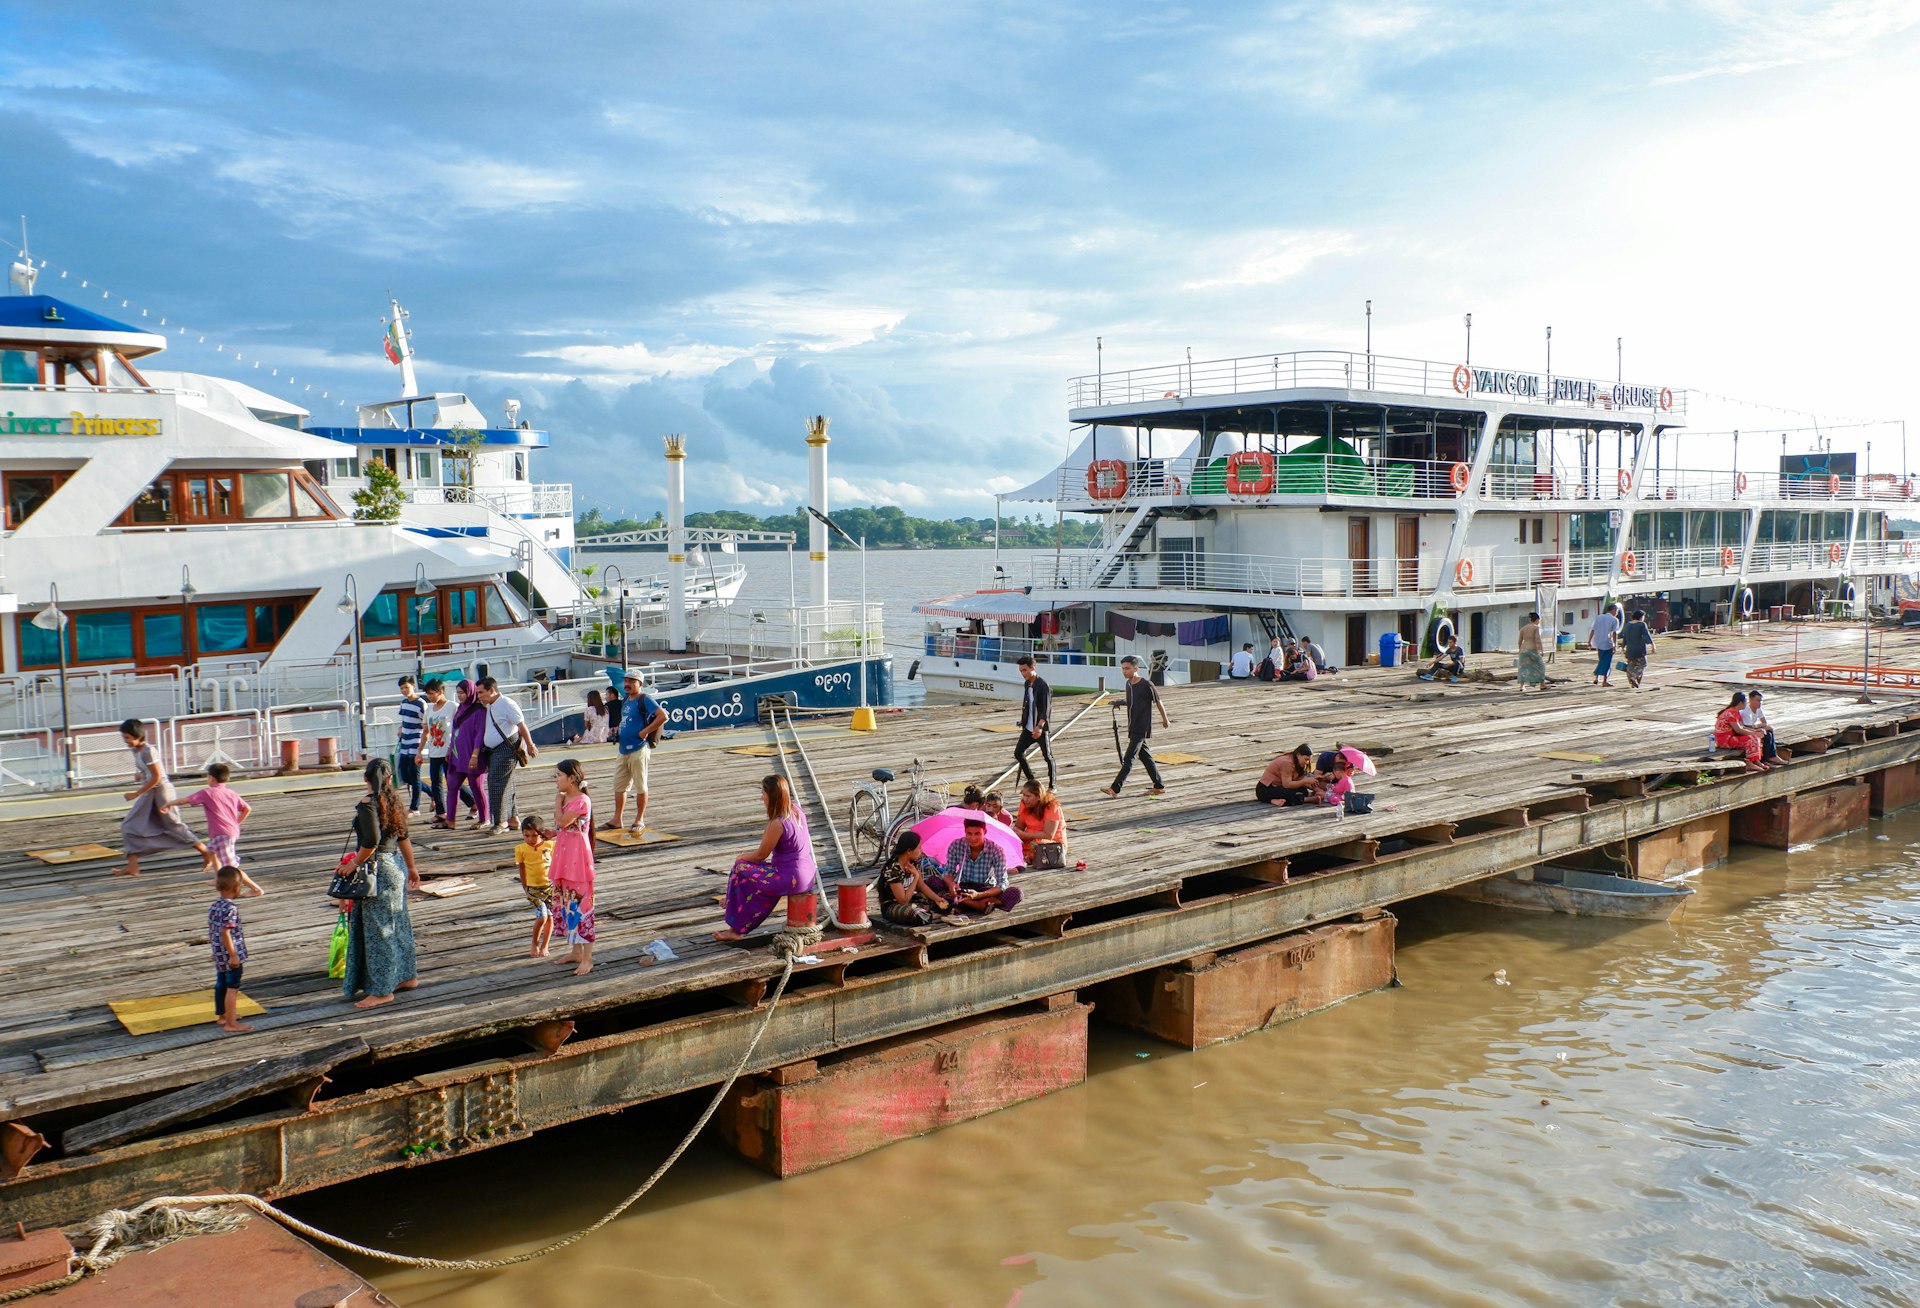 Groups of people sit and walk along wooden Botataung Jetty, which splinters out into Yangon River. In the background a couple of large yachts are visible.